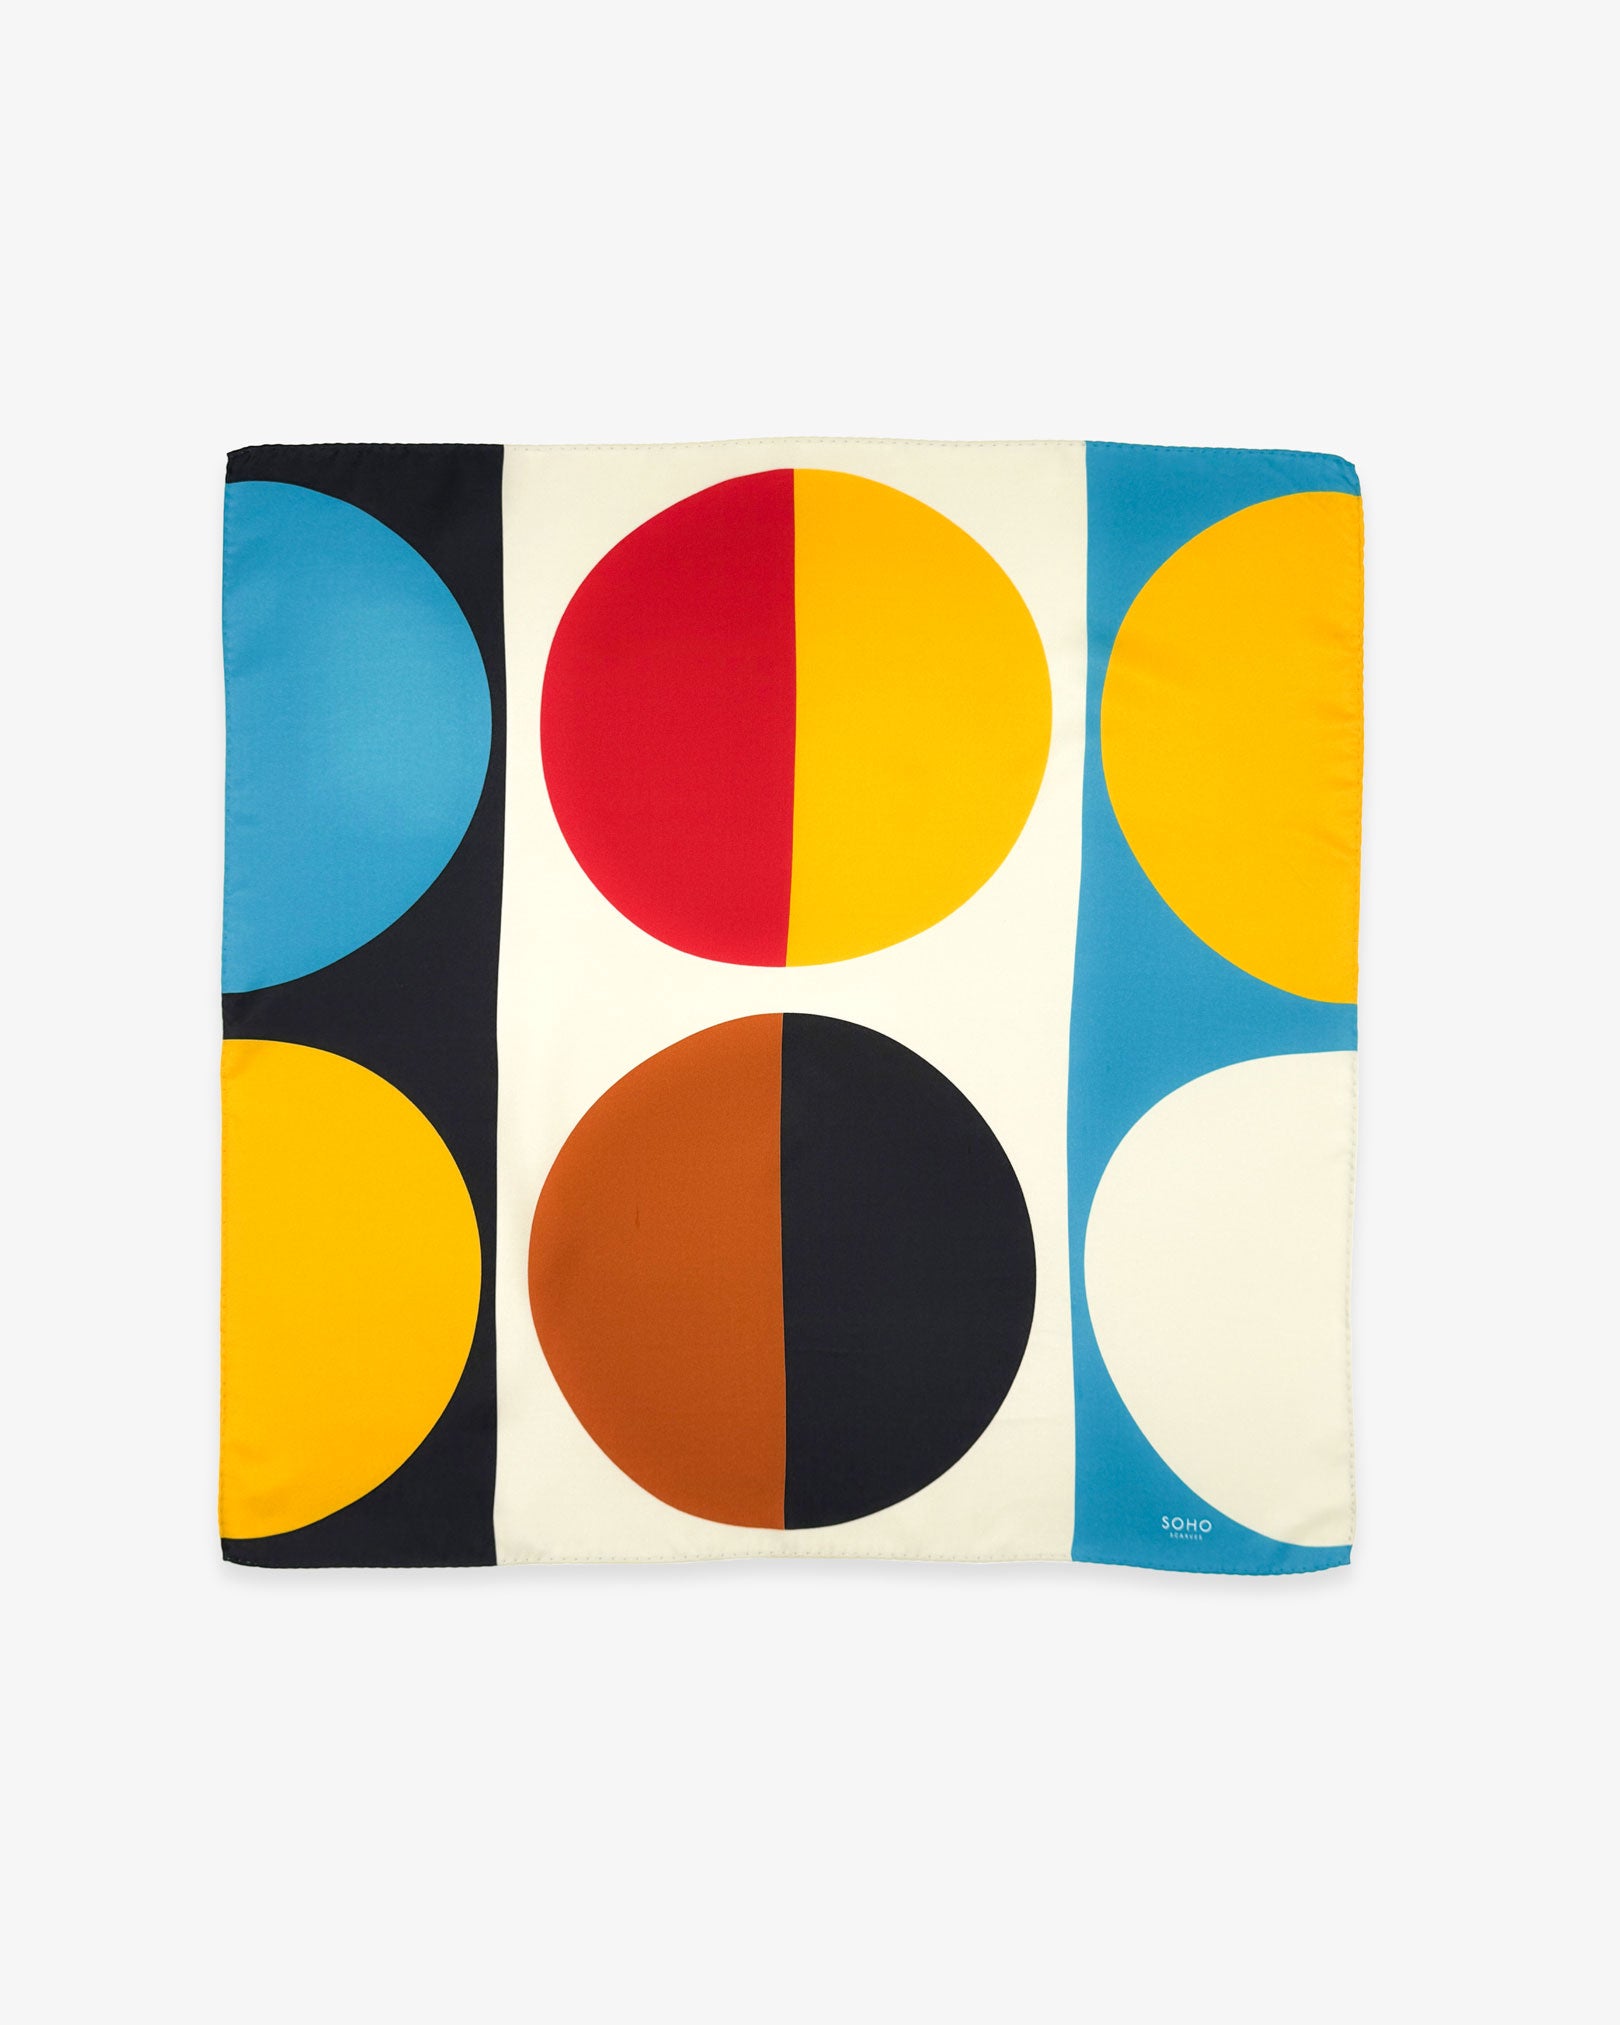 Fully unfolded 'Weimar' silk pocket square, showing the semicircles and rectangular blocks of the Bauhaus inspired, multicoloured palette.